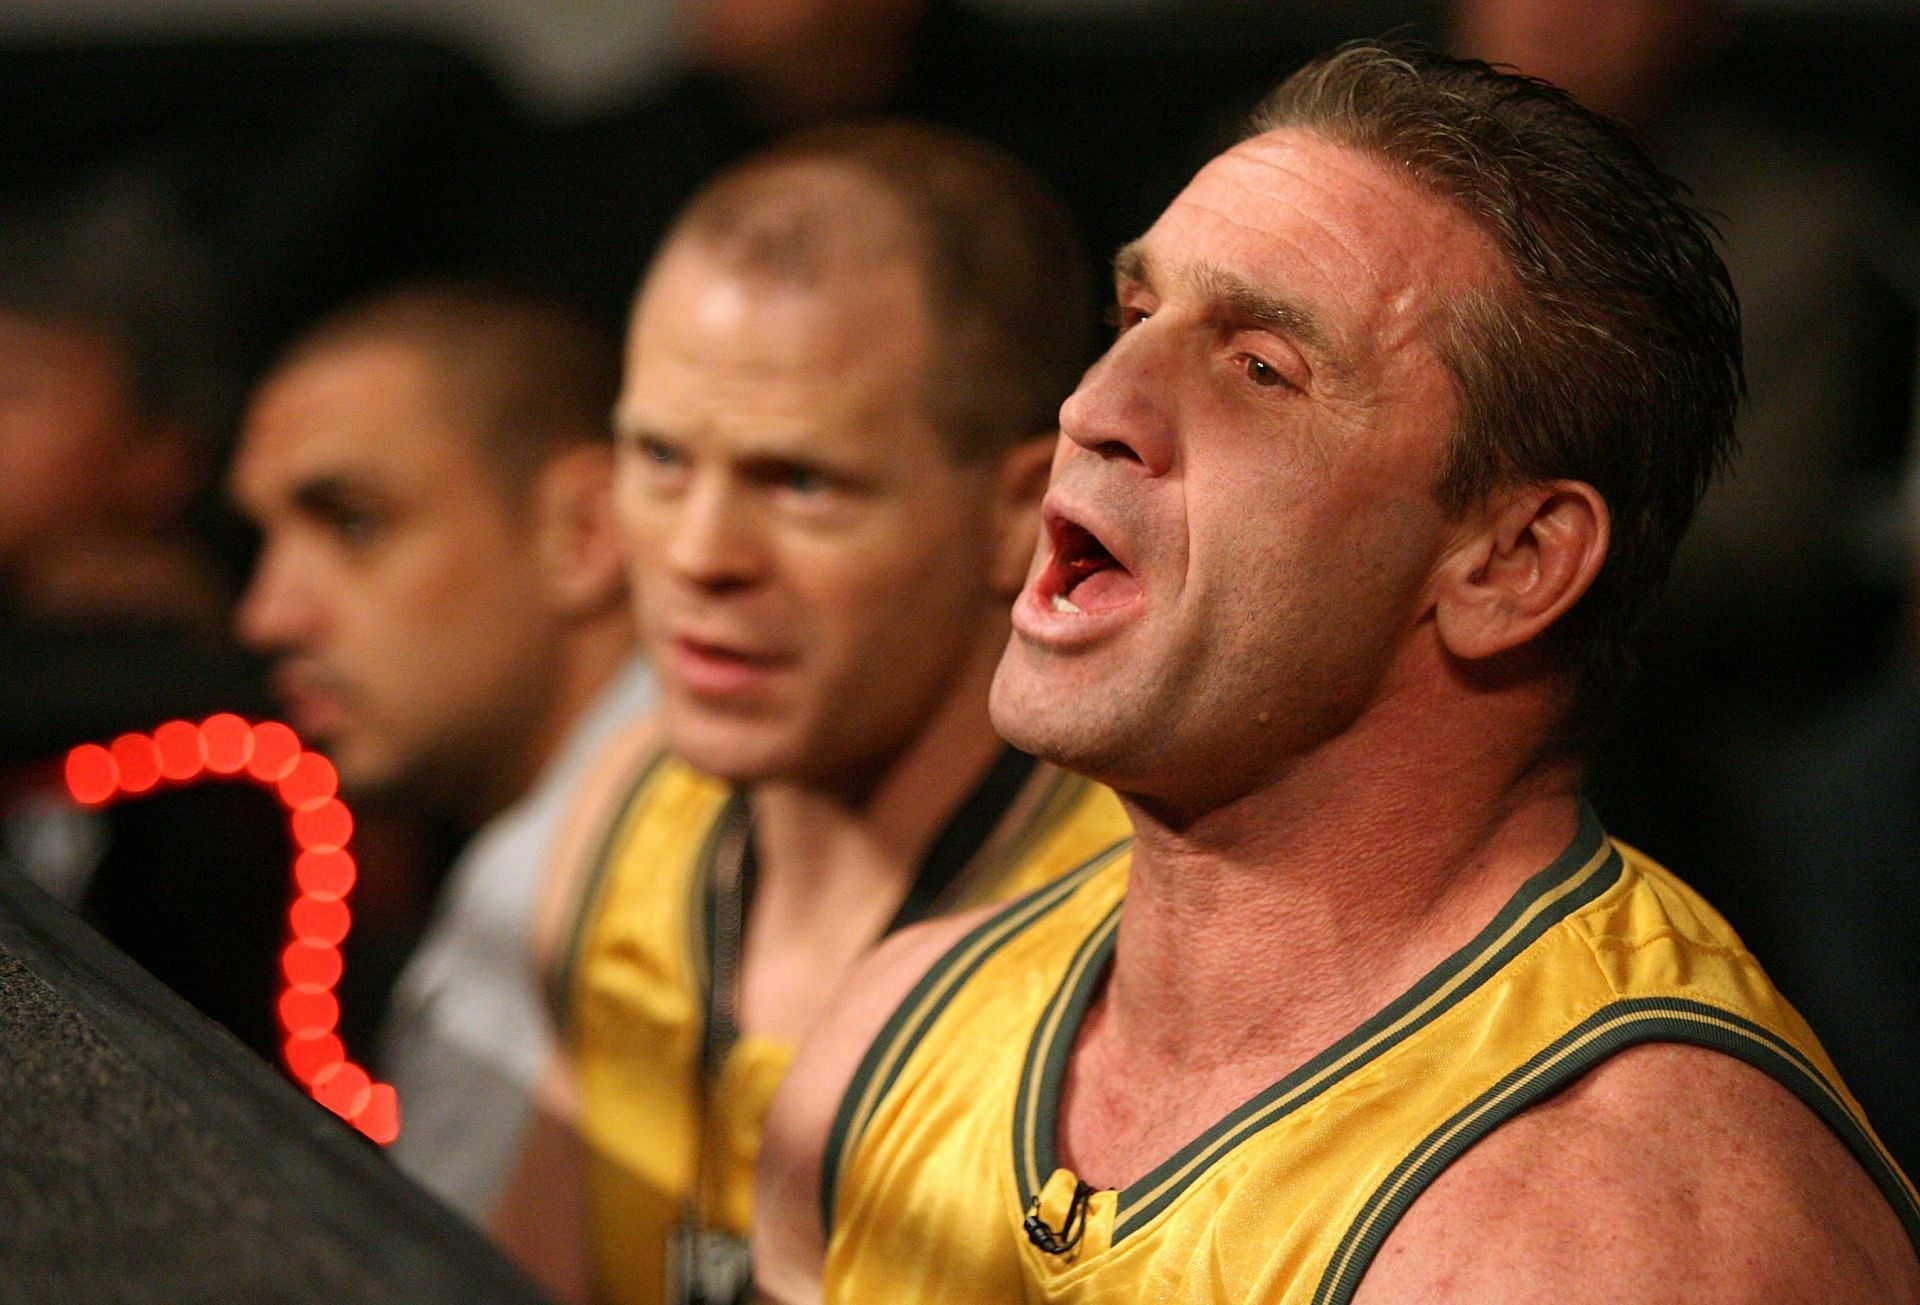 Ken Shamrock submitted Dan Severn in 1995 to rise to the top of the UFC